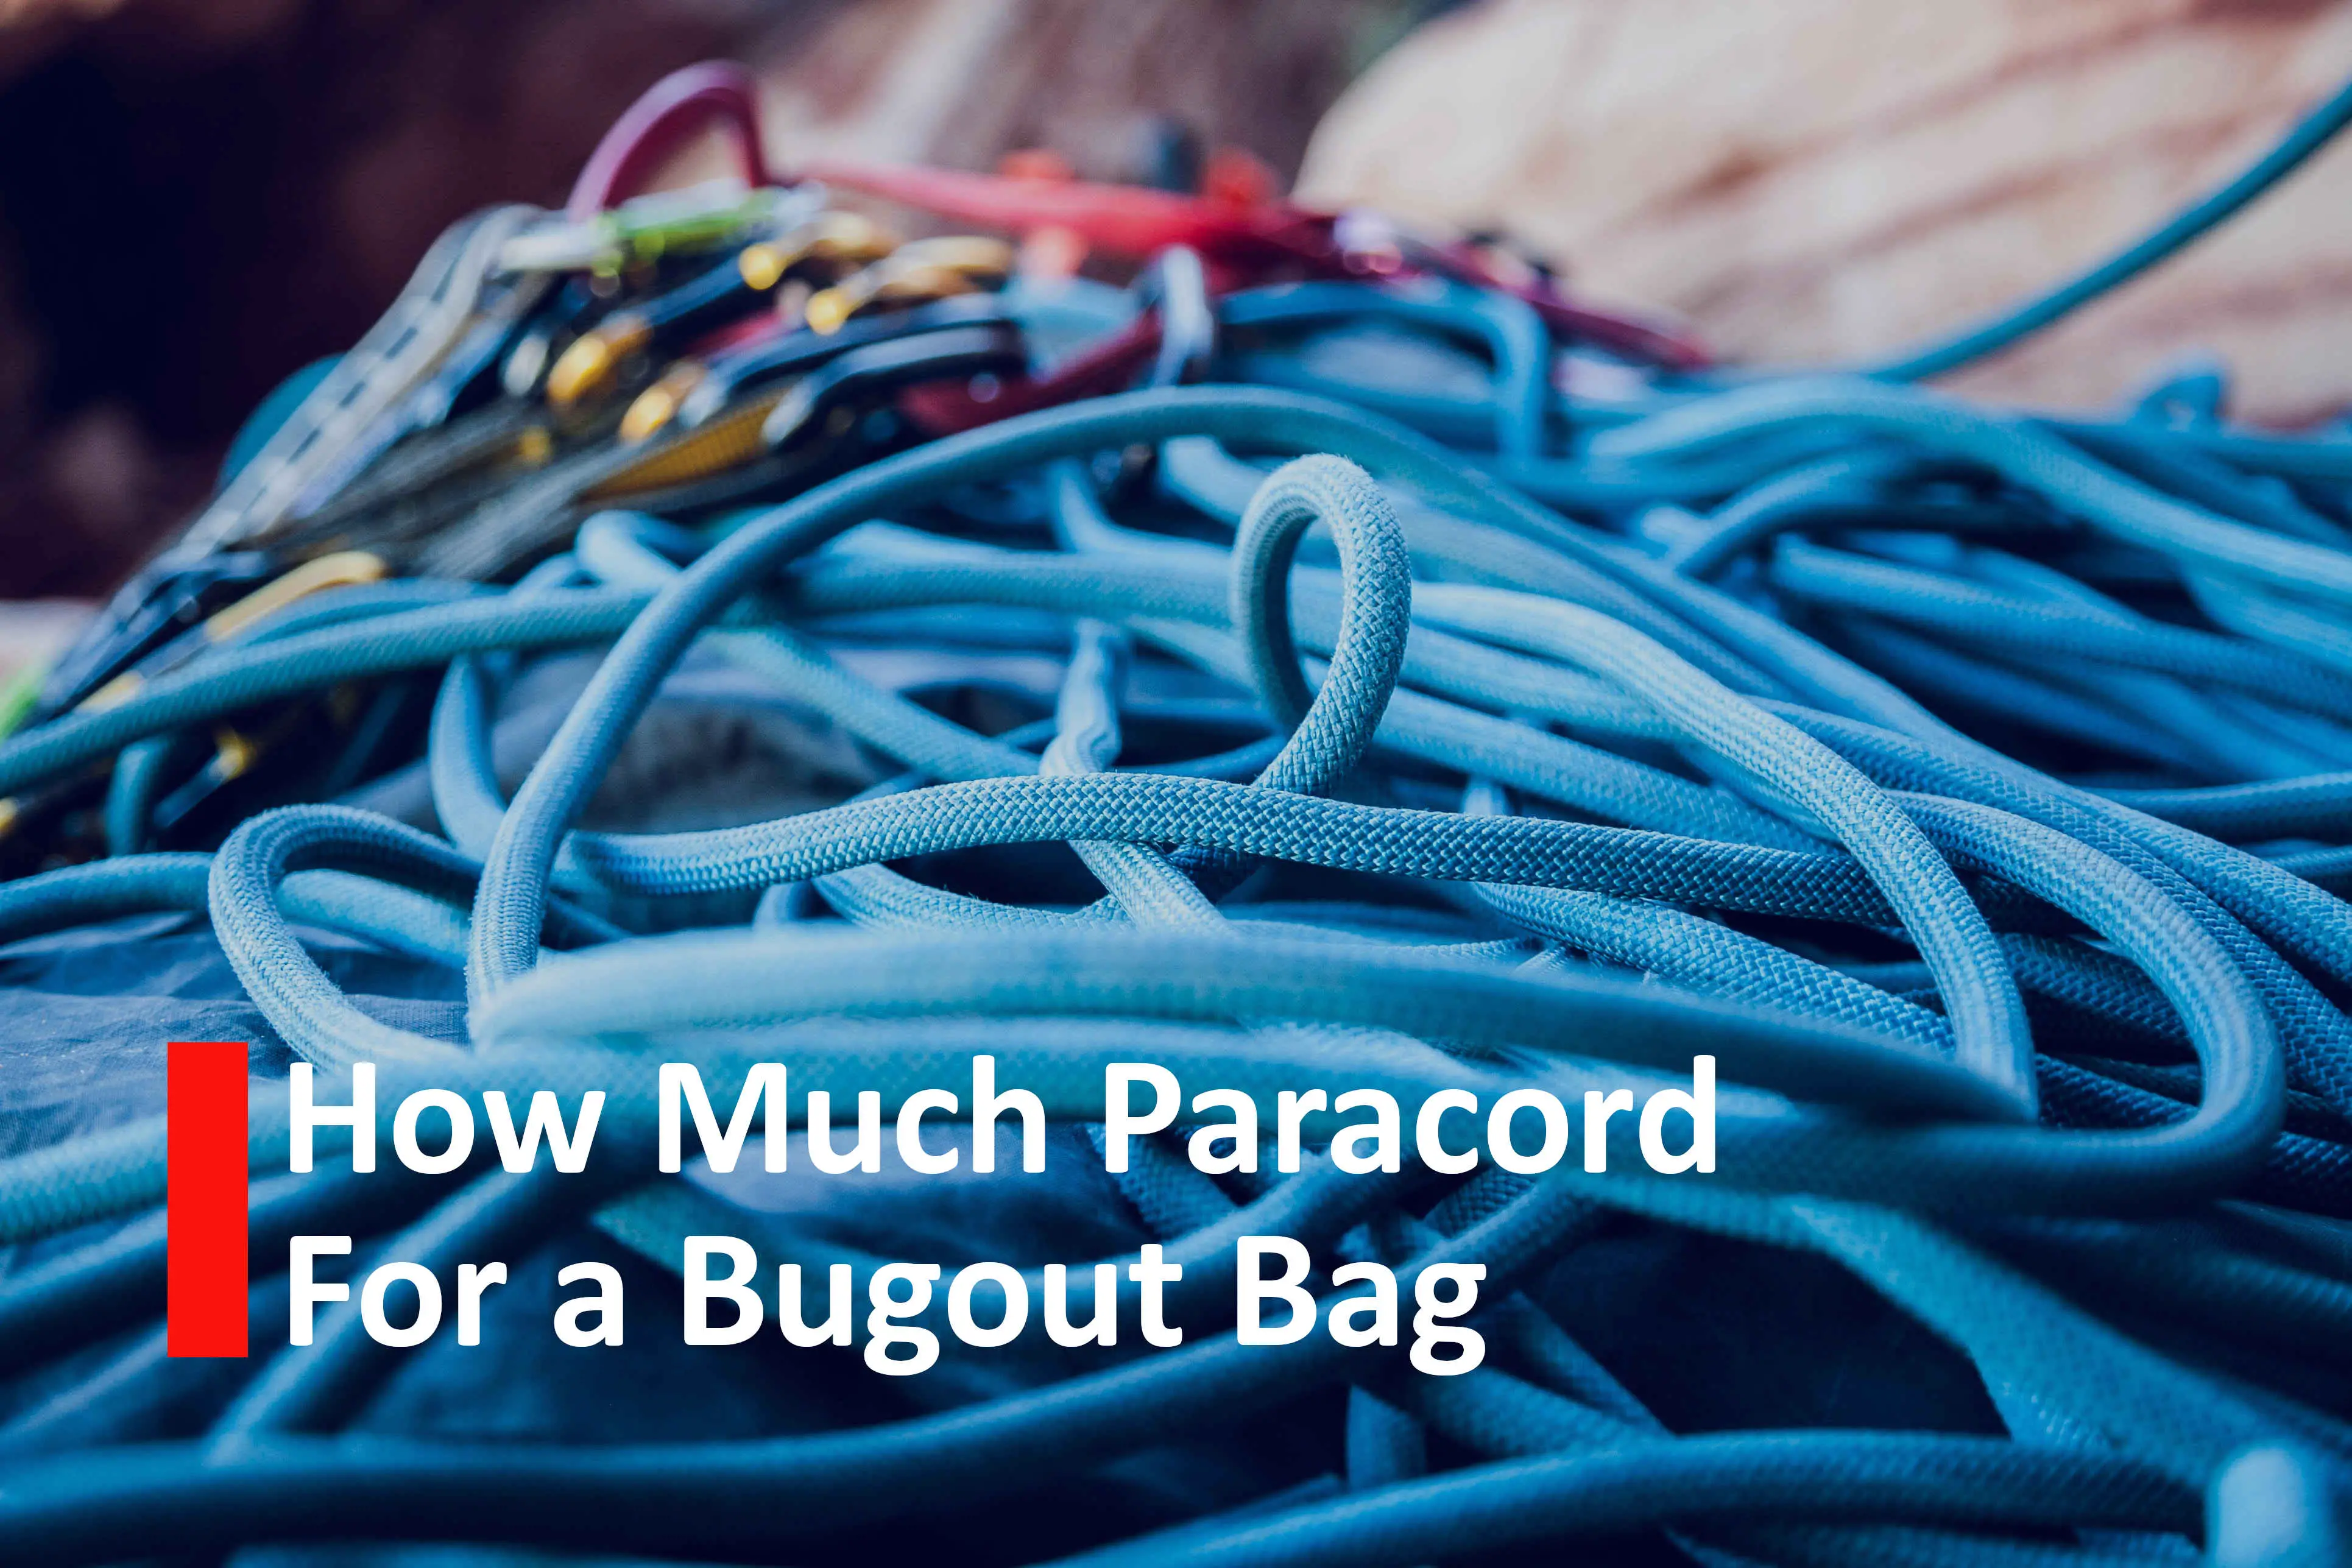 How Much Paracord for Bugout Bag